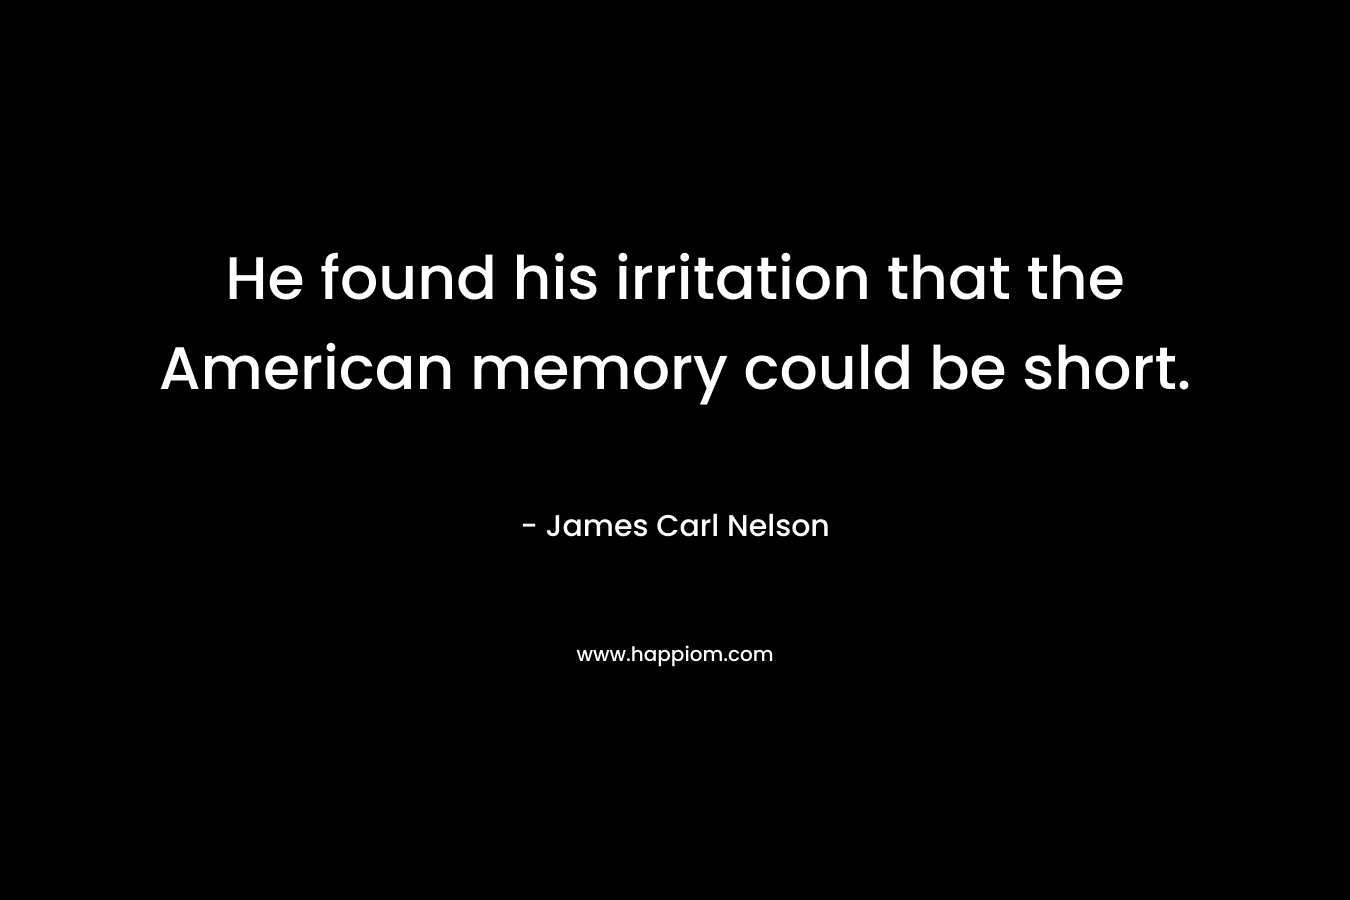 He found his irritation that the American memory could be short. – James Carl Nelson